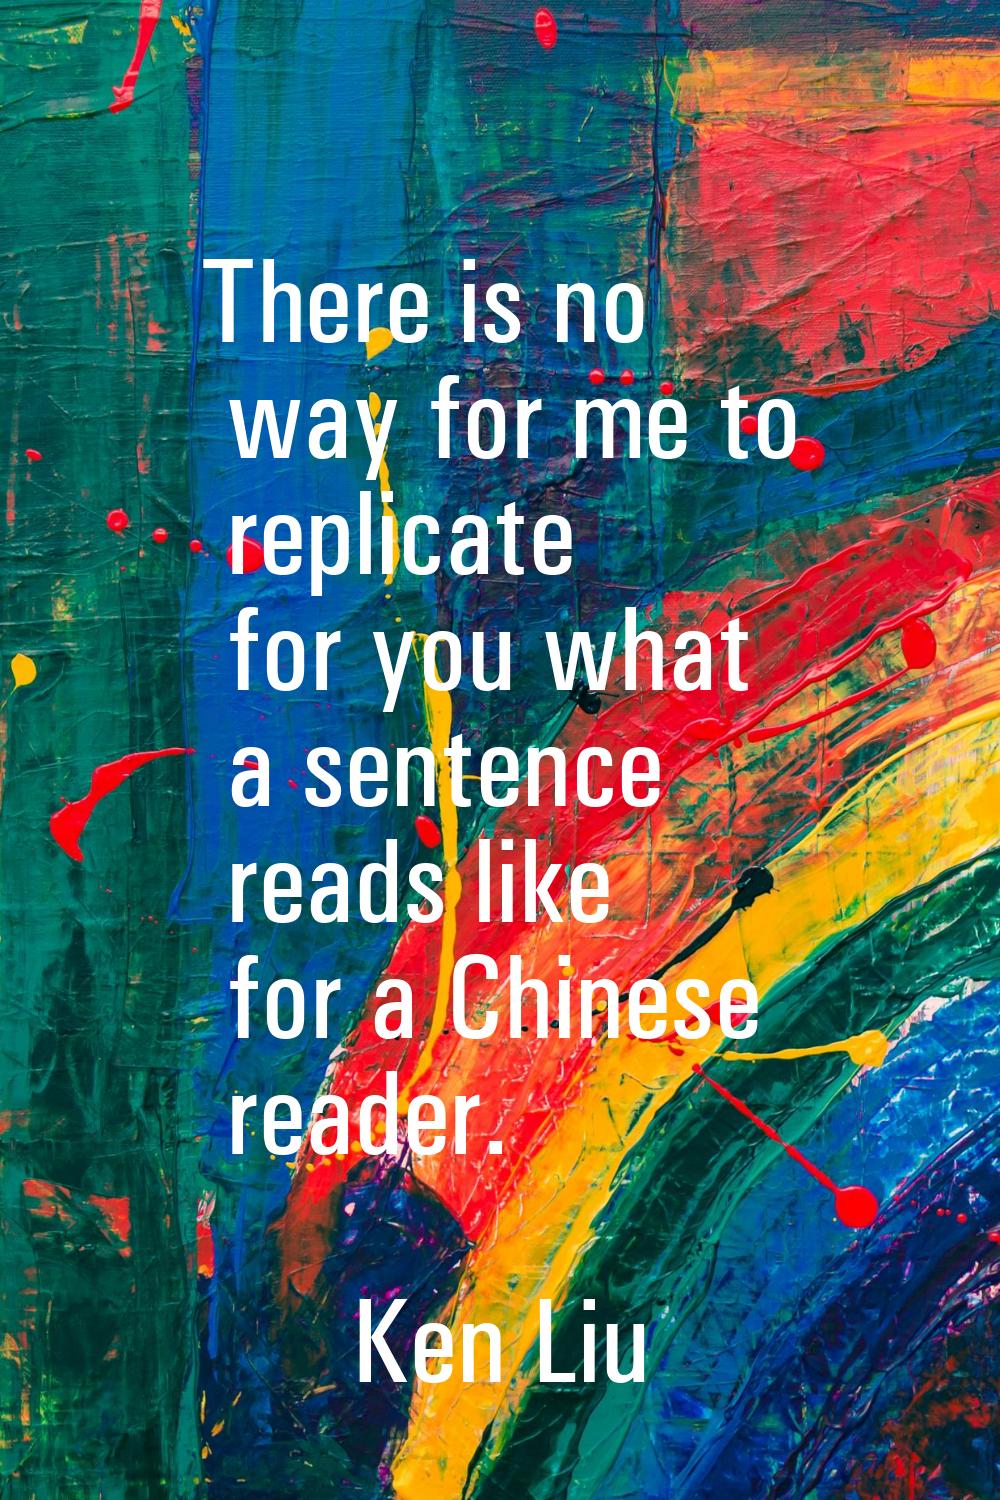 There is no way for me to replicate for you what a sentence reads like for a Chinese reader.